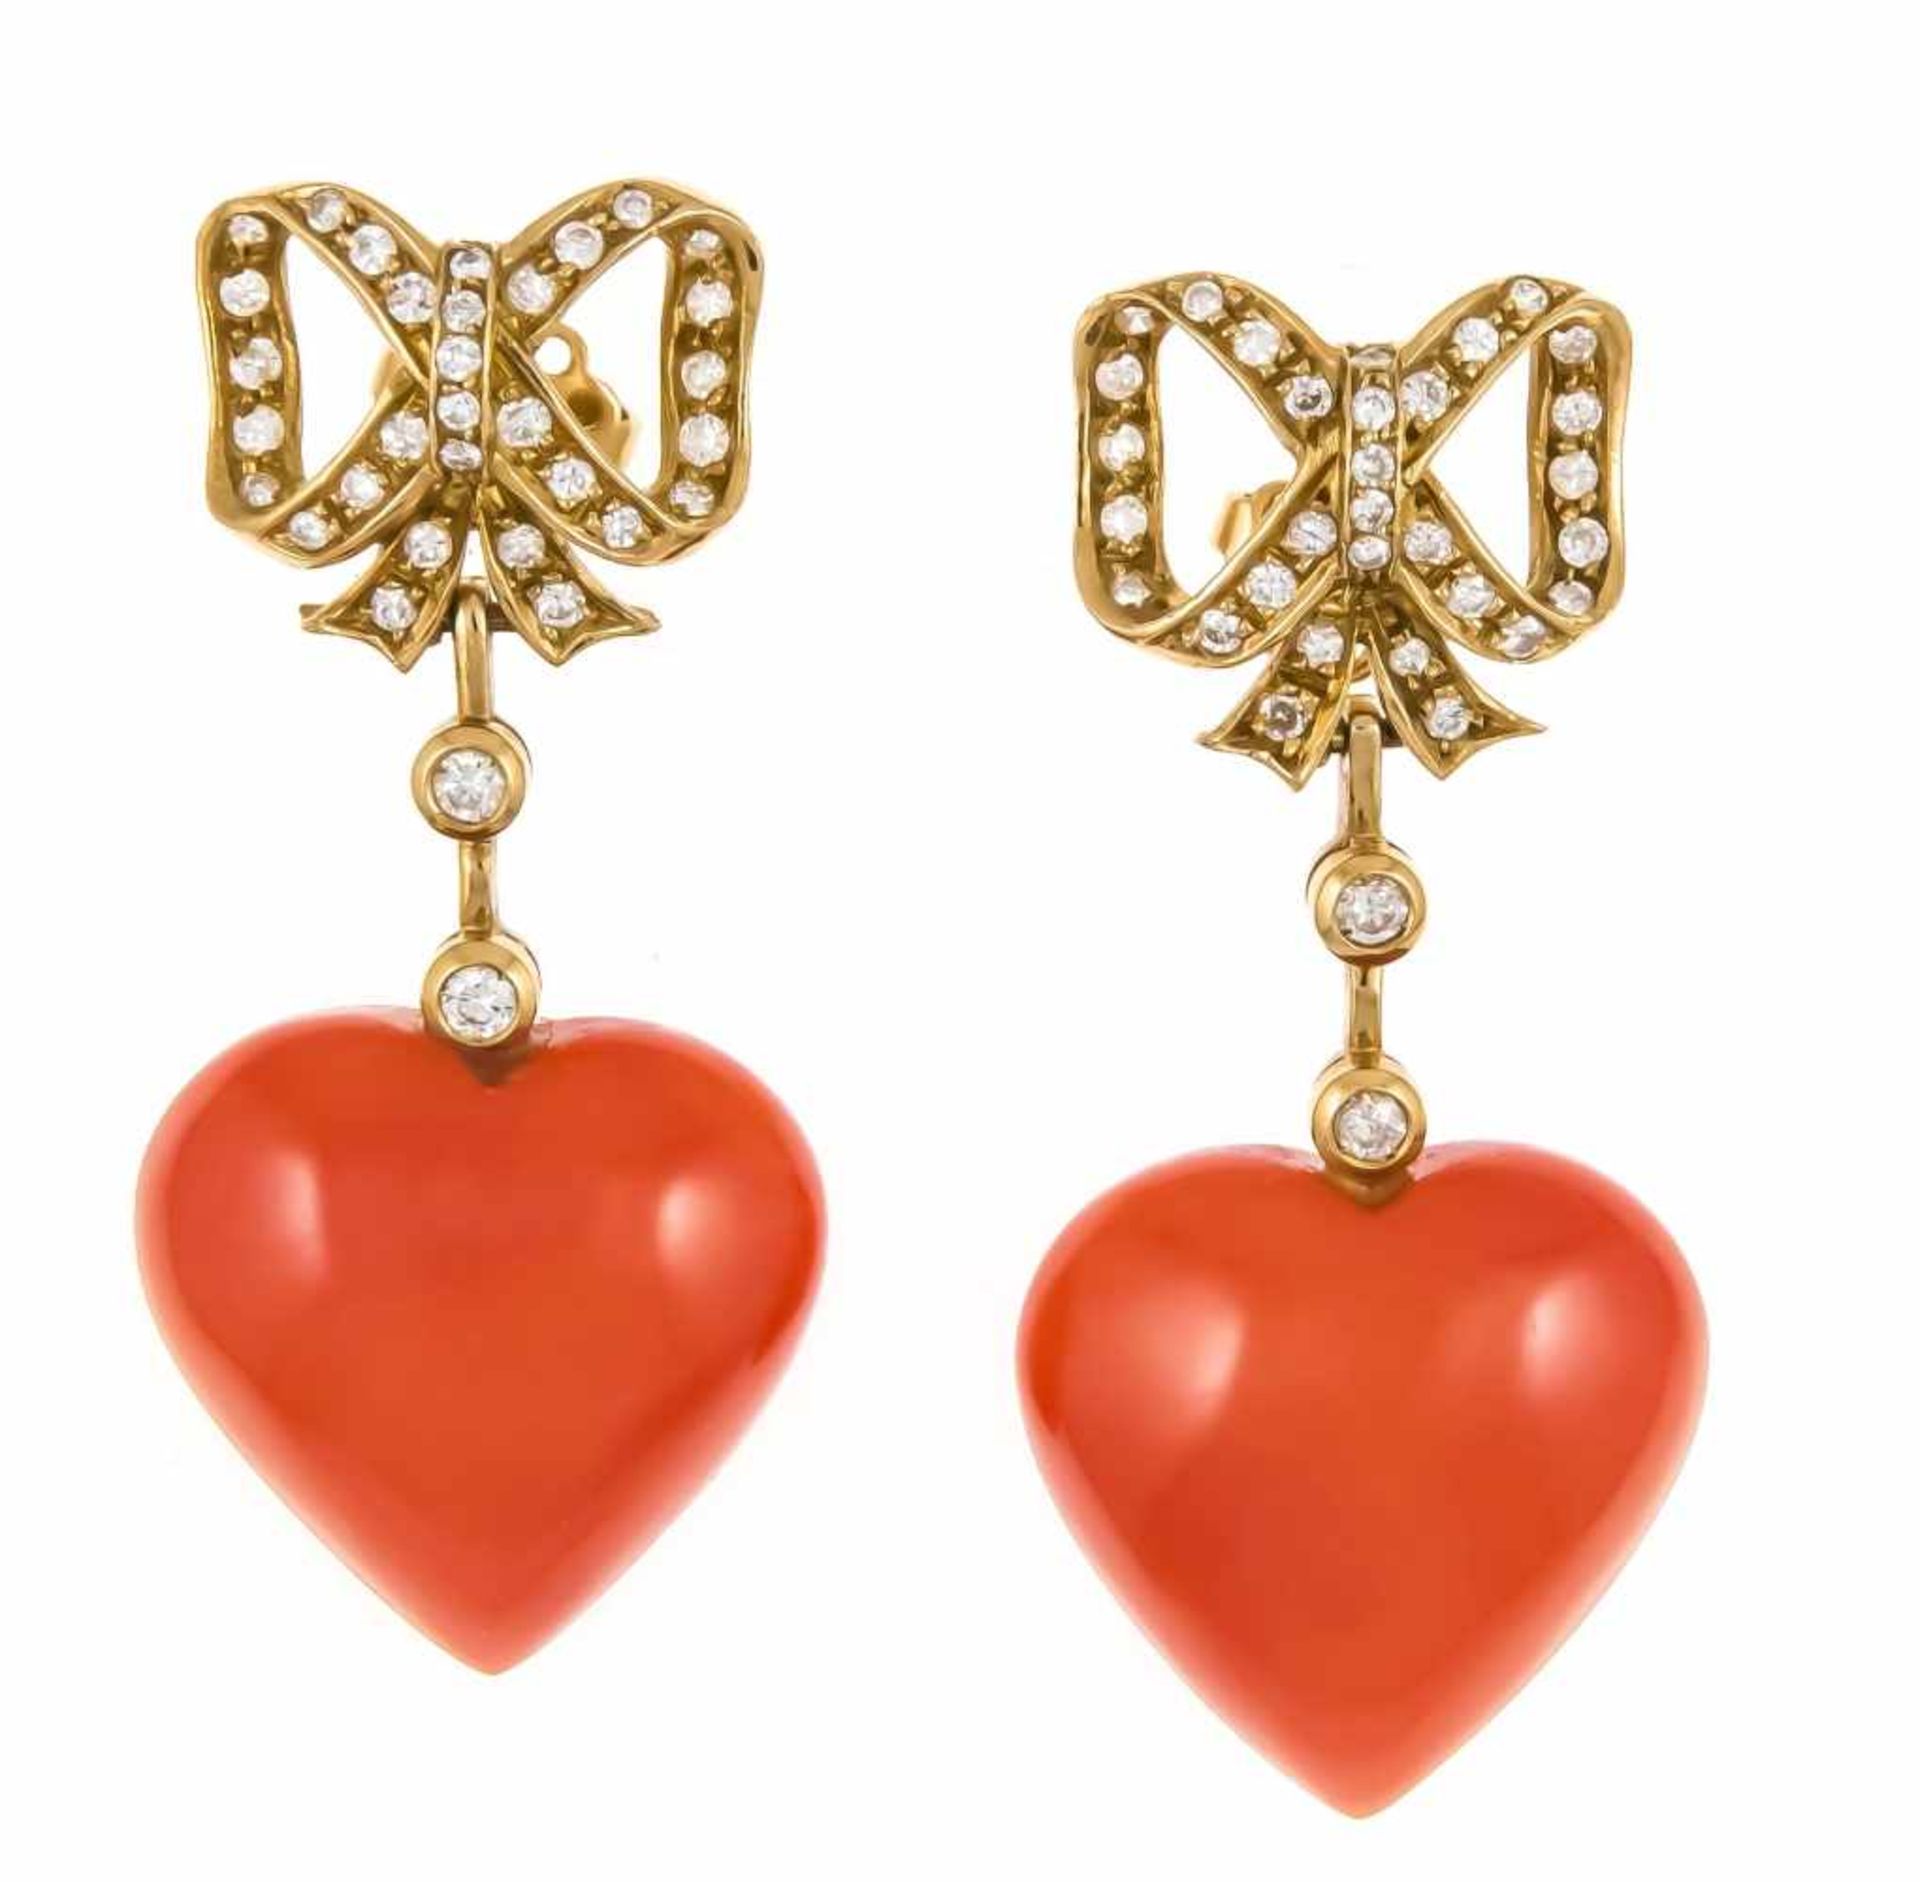 Coral diamond stud earrings GG 750/000, each with a fine coral heart 20 mm and brilliantdiamonds,